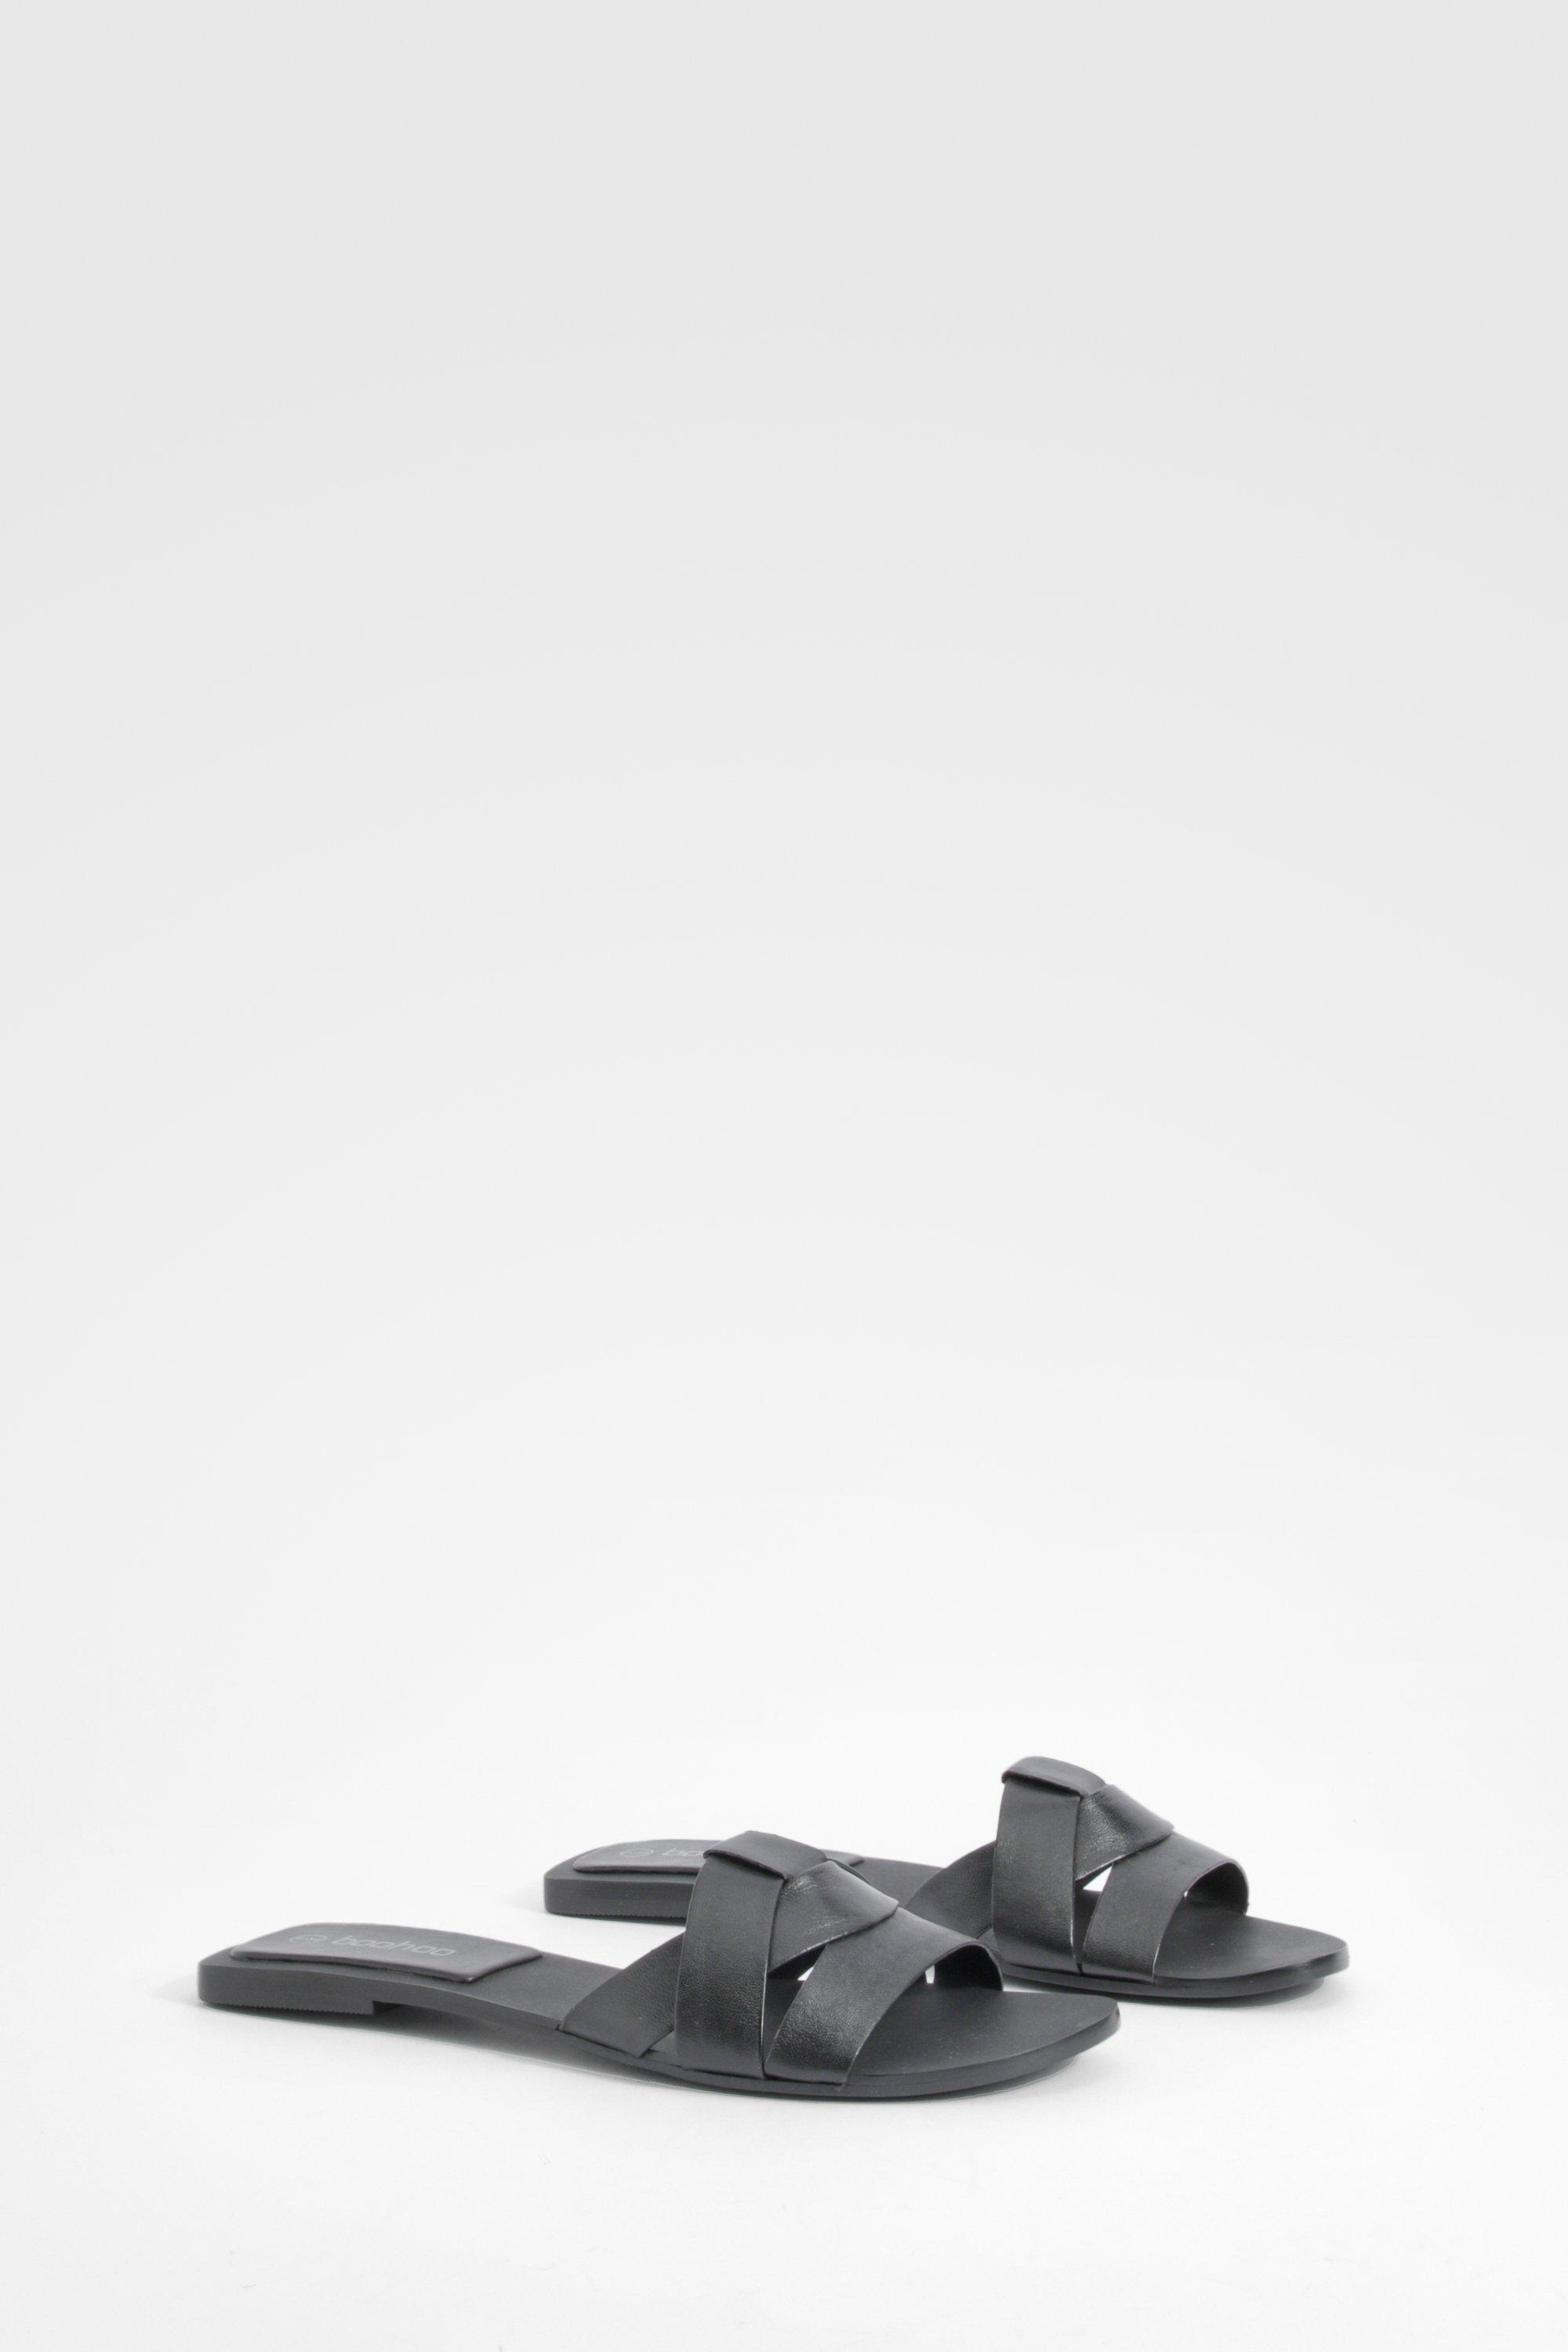 Image of Woven Leather Mule Sandals, Nero